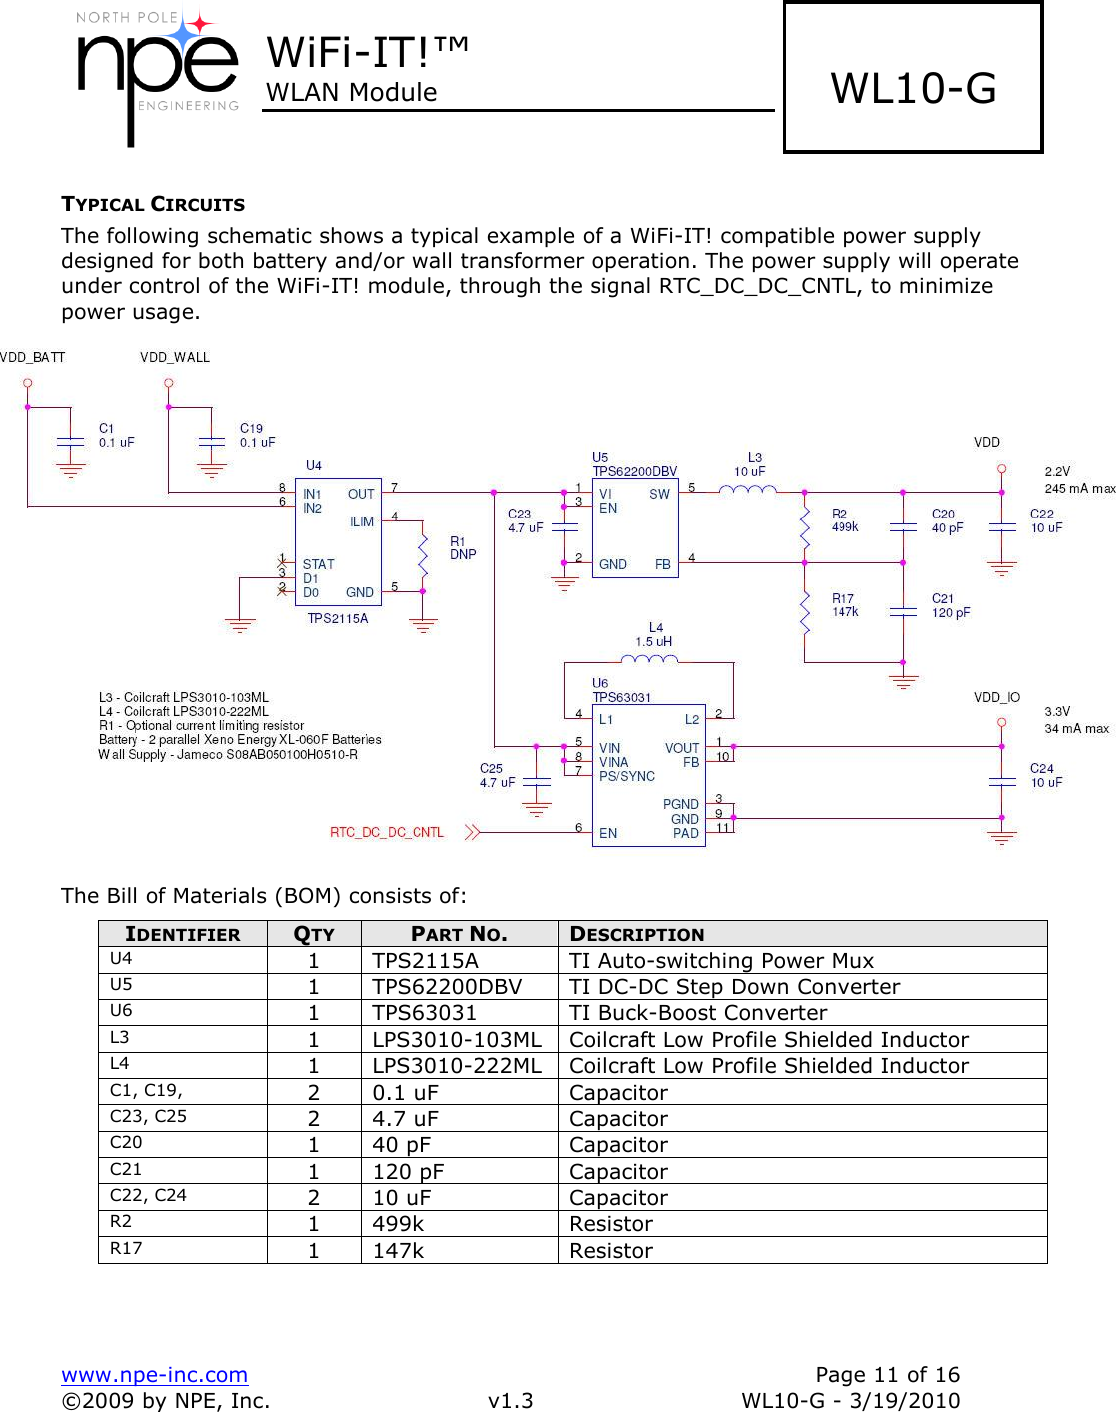  WiFi-IT!™ WLAN Module    www.npe-inc.com    Page 11 of 16 ©2009 by NPE, Inc.  v1.3  WL10-G - 3/19/2010    WL10-G TYPICAL CIRCUITS The following schematic shows a typical example of a WiFi-IT! compatible power supply designed for both battery and/or wall transformer operation. The power supply will operate under control of the WiFi-IT! module, through the signal RTC_DC_DC_CNTL, to minimize power usage.    The Bill of Materials (BOM) consists of: IDENTIFIER QTY PART NO. DESCRIPTION U4 1 TPS2115A TI Auto-switching Power Mux U5 1 TPS62200DBV TI DC-DC Step Down Converter U6 1 TPS63031 TI Buck-Boost Converter L3 1 LPS3010-103ML Coilcraft Low Profile Shielded Inductor L4 1 LPS3010-222ML Coilcraft Low Profile Shielded Inductor C1, C19, 2 0.1 uF Capacitor C23, C25 2 4.7 uF Capacitor C20 1 40 pF Capacitor C21 1 120 pF Capacitor C22, C24 2 10 uF Capacitor R2 1 499k Resistor R17 1 147k Resistor  